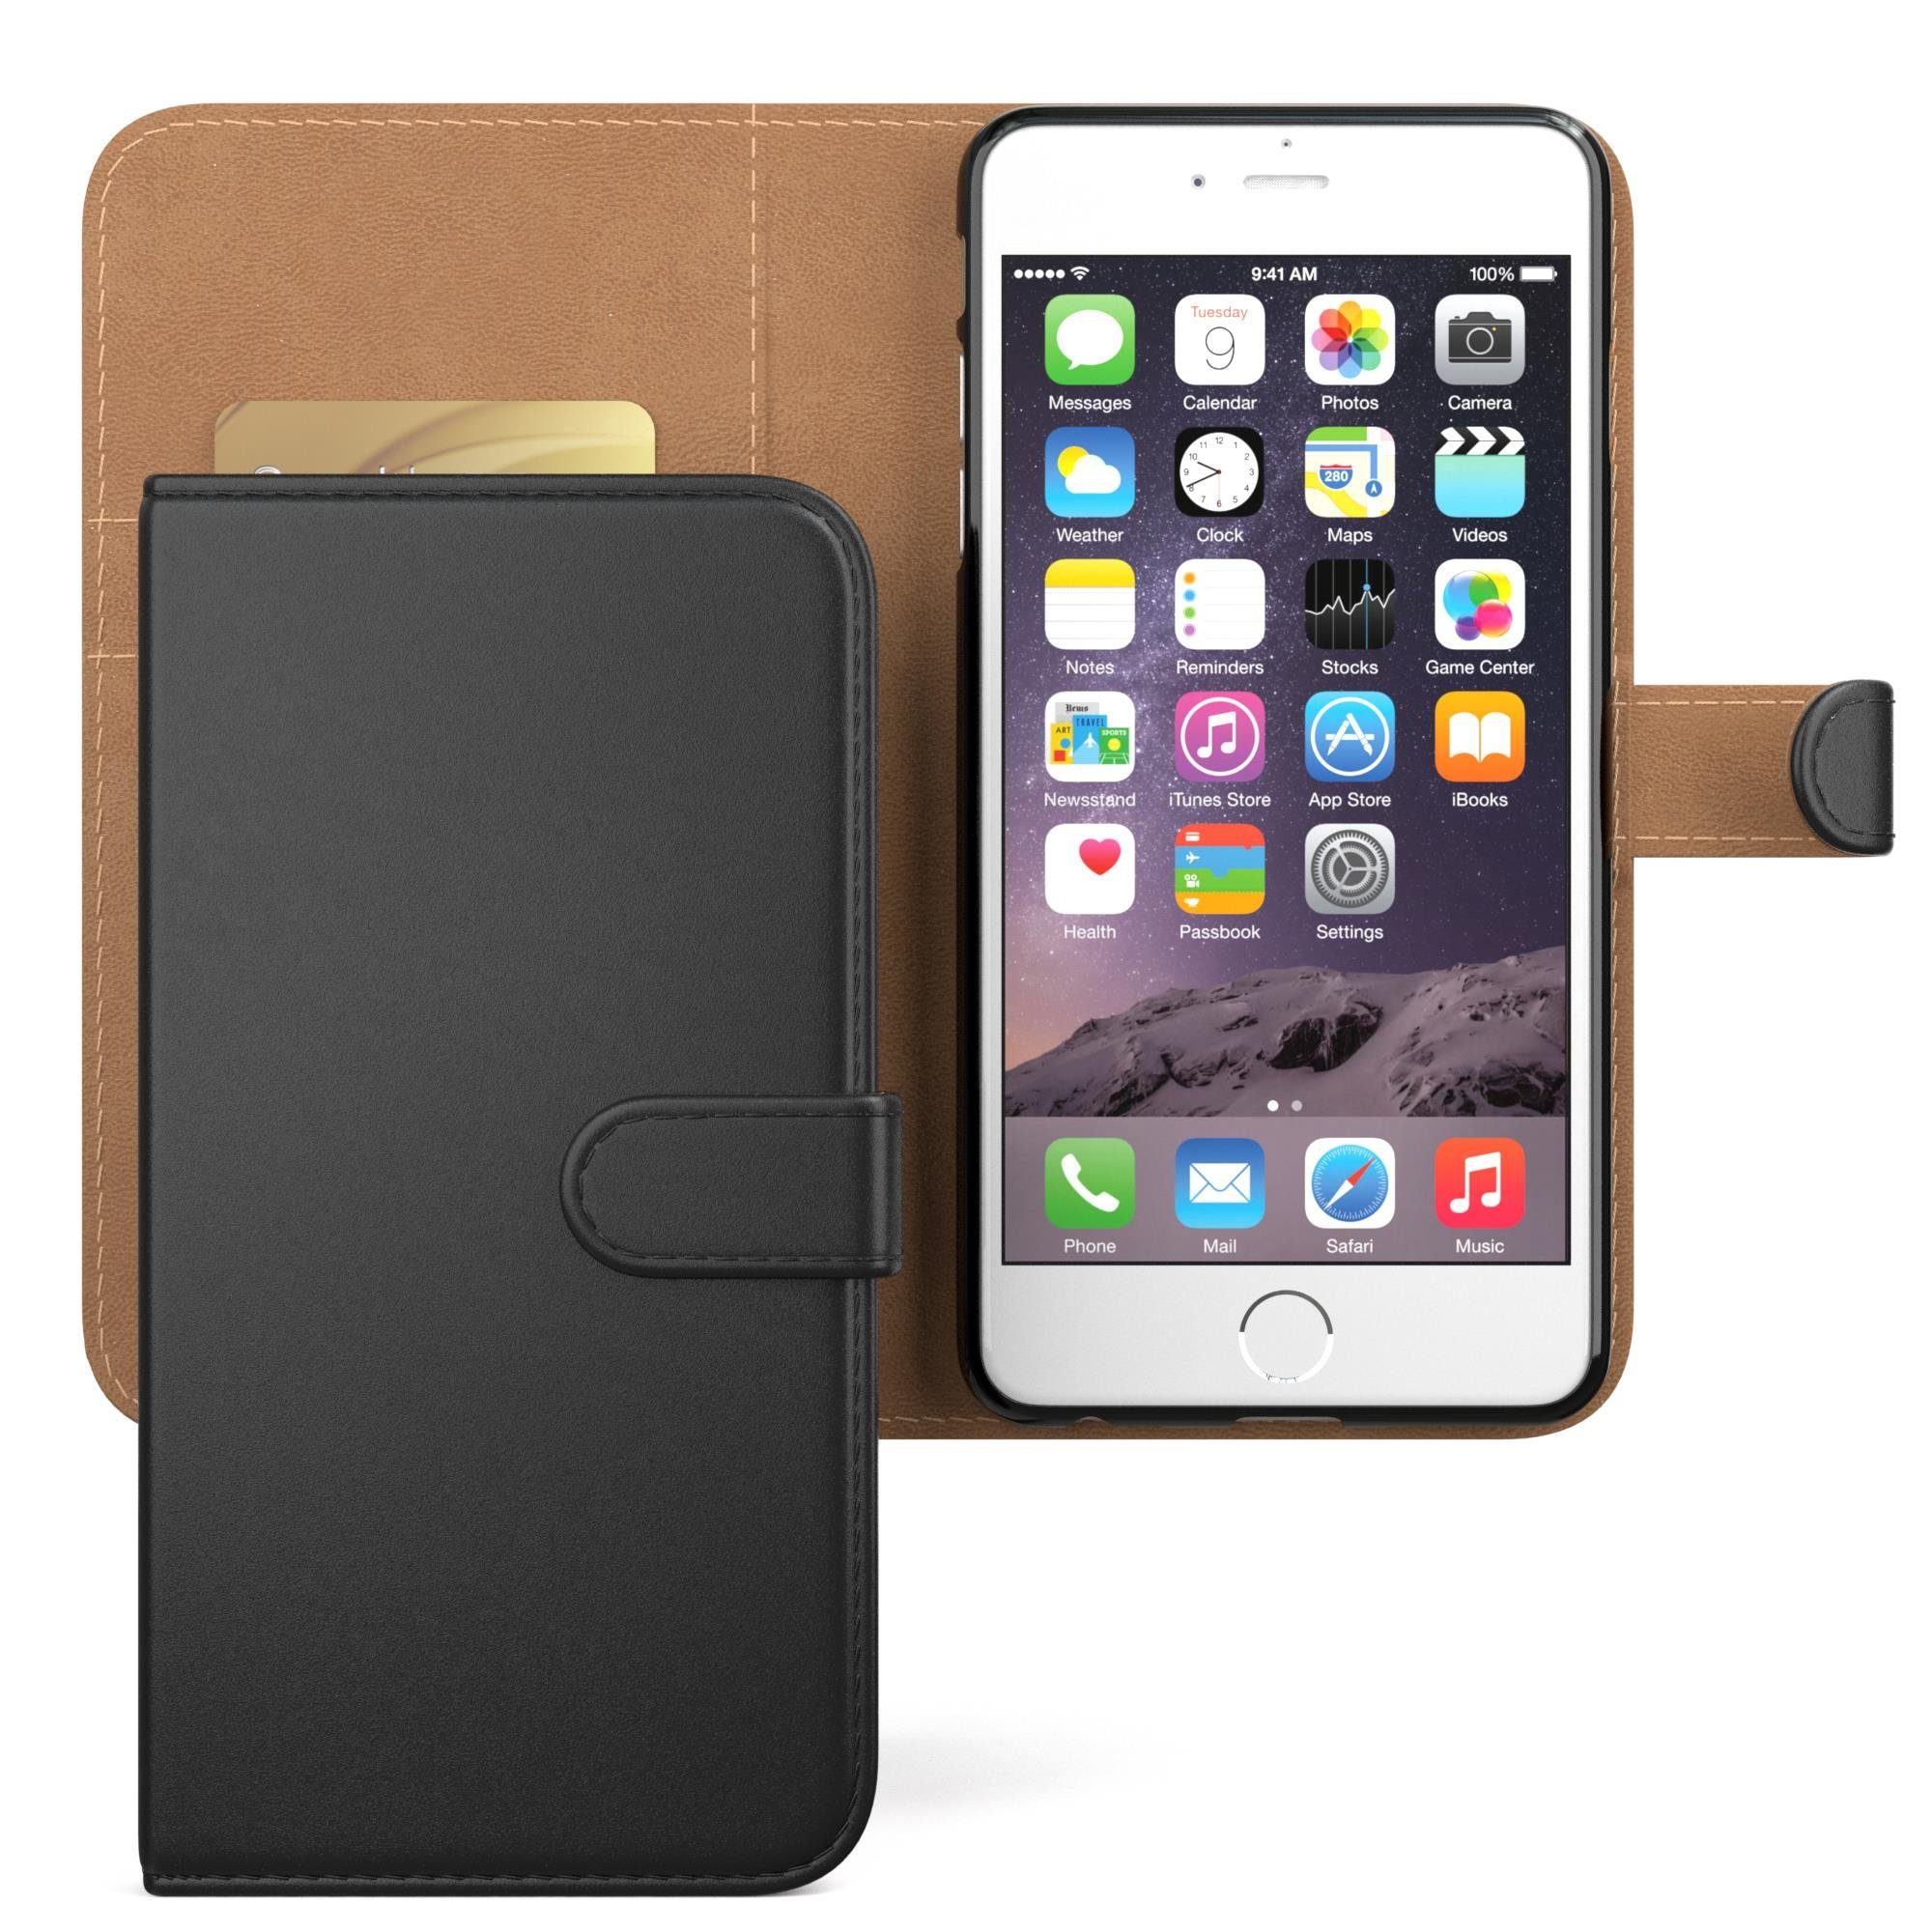 EAZY CASE Handyhülle Bookstyle Farbig für Apple iPhone 6 / iPhone 6s